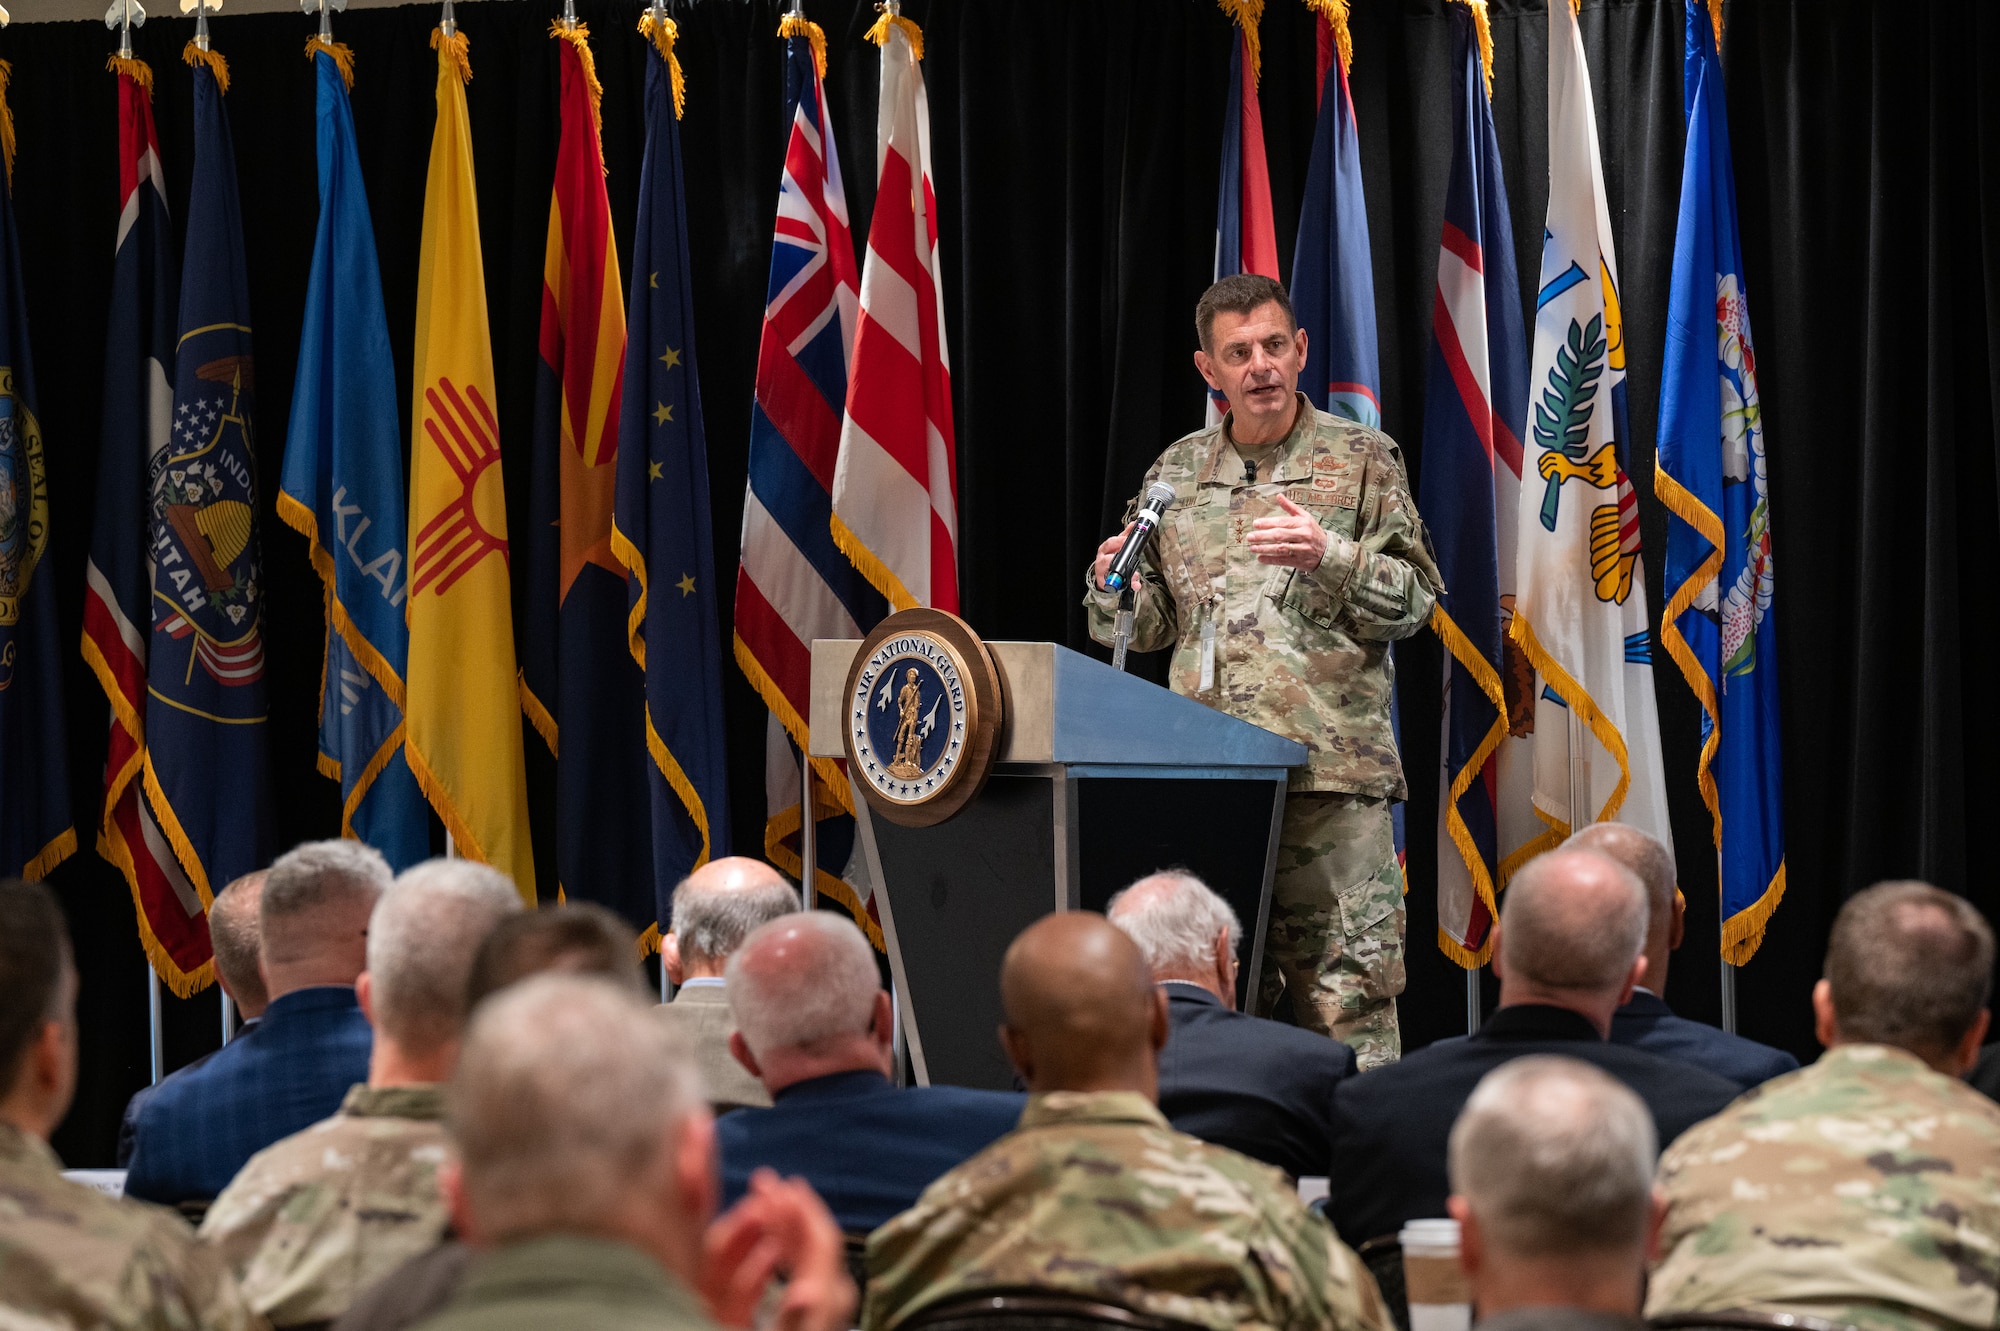 U.S. Air Force Lt. Gen. Michael A. Loh, director, Air National Guard (ANG), discusses critical matters impacting the future of the ANG during the 2023 Wing Leader Conference in Newport Beach, California, April 26, 2023.